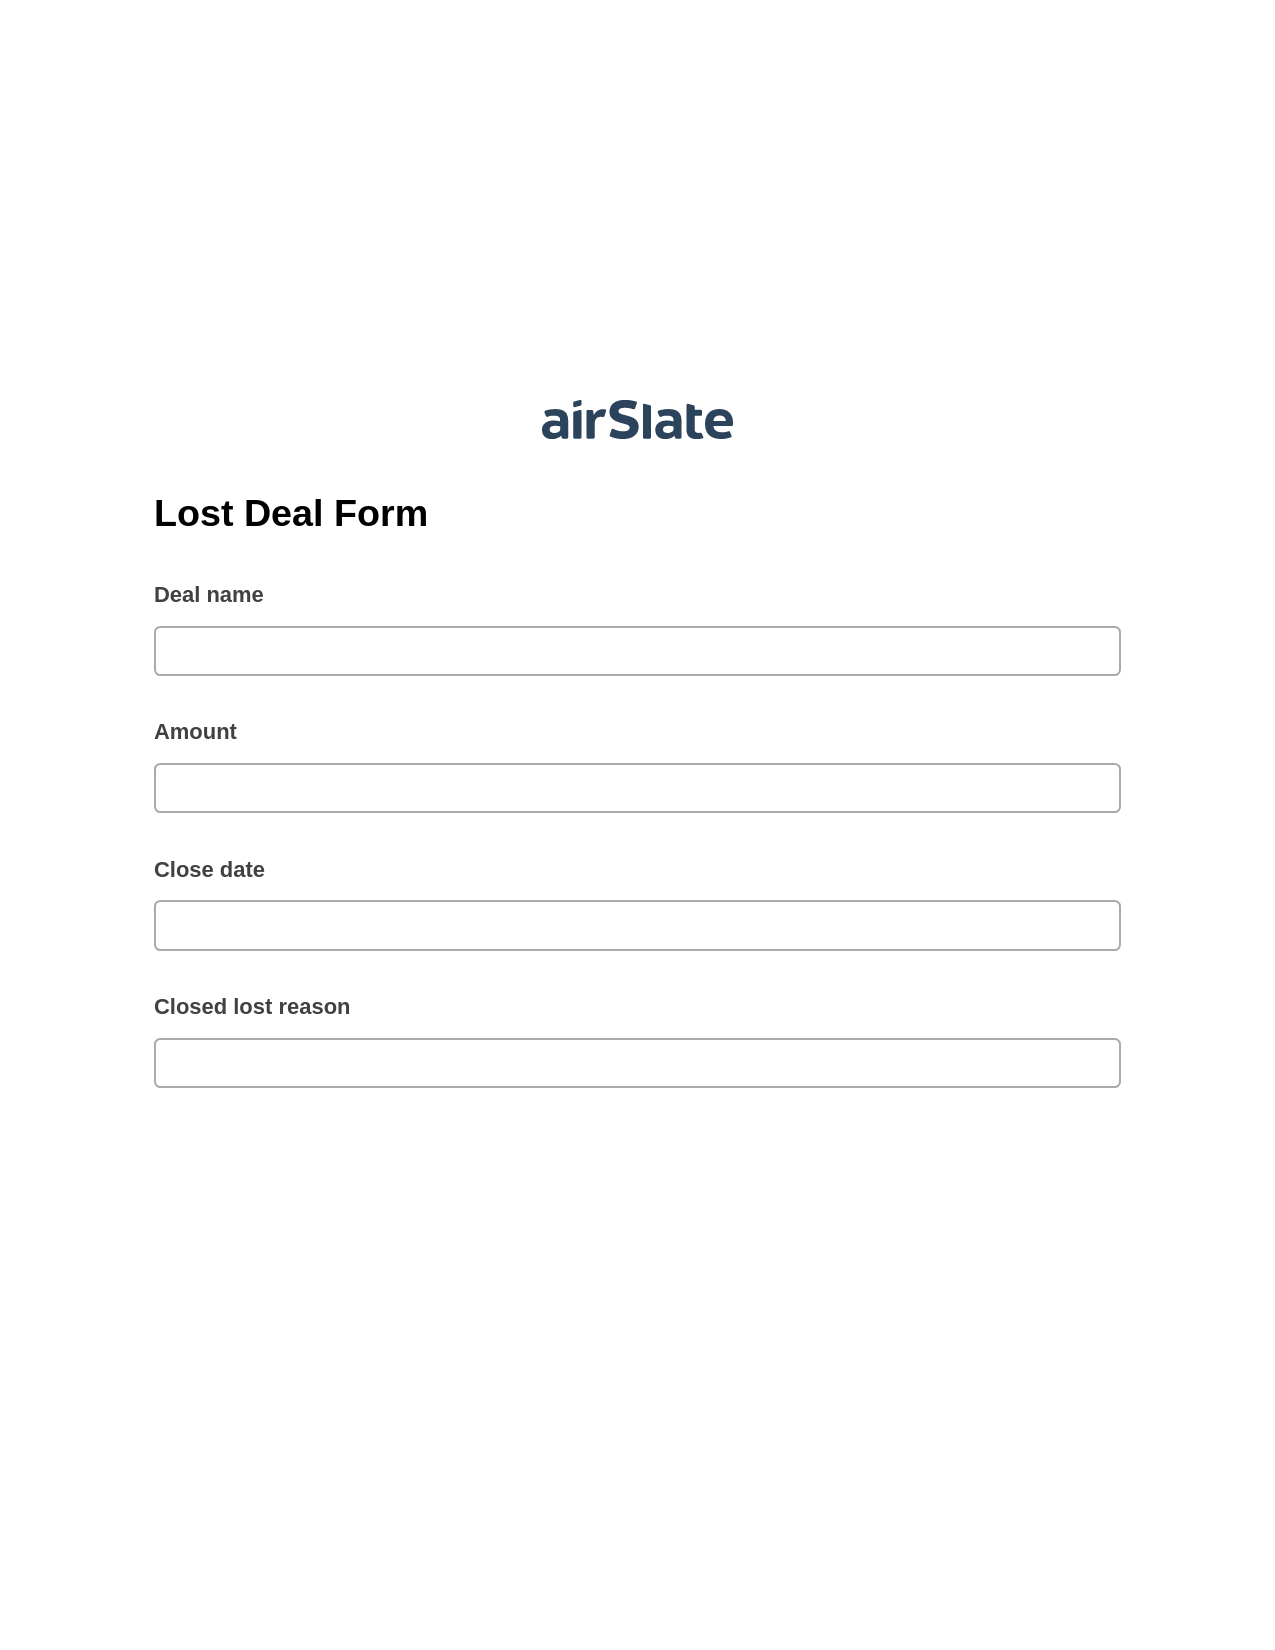 Lost Deal Form Pre-fill from MS Dynamics 365 Records, Create slate addon, Slack Two-Way Binding Bot